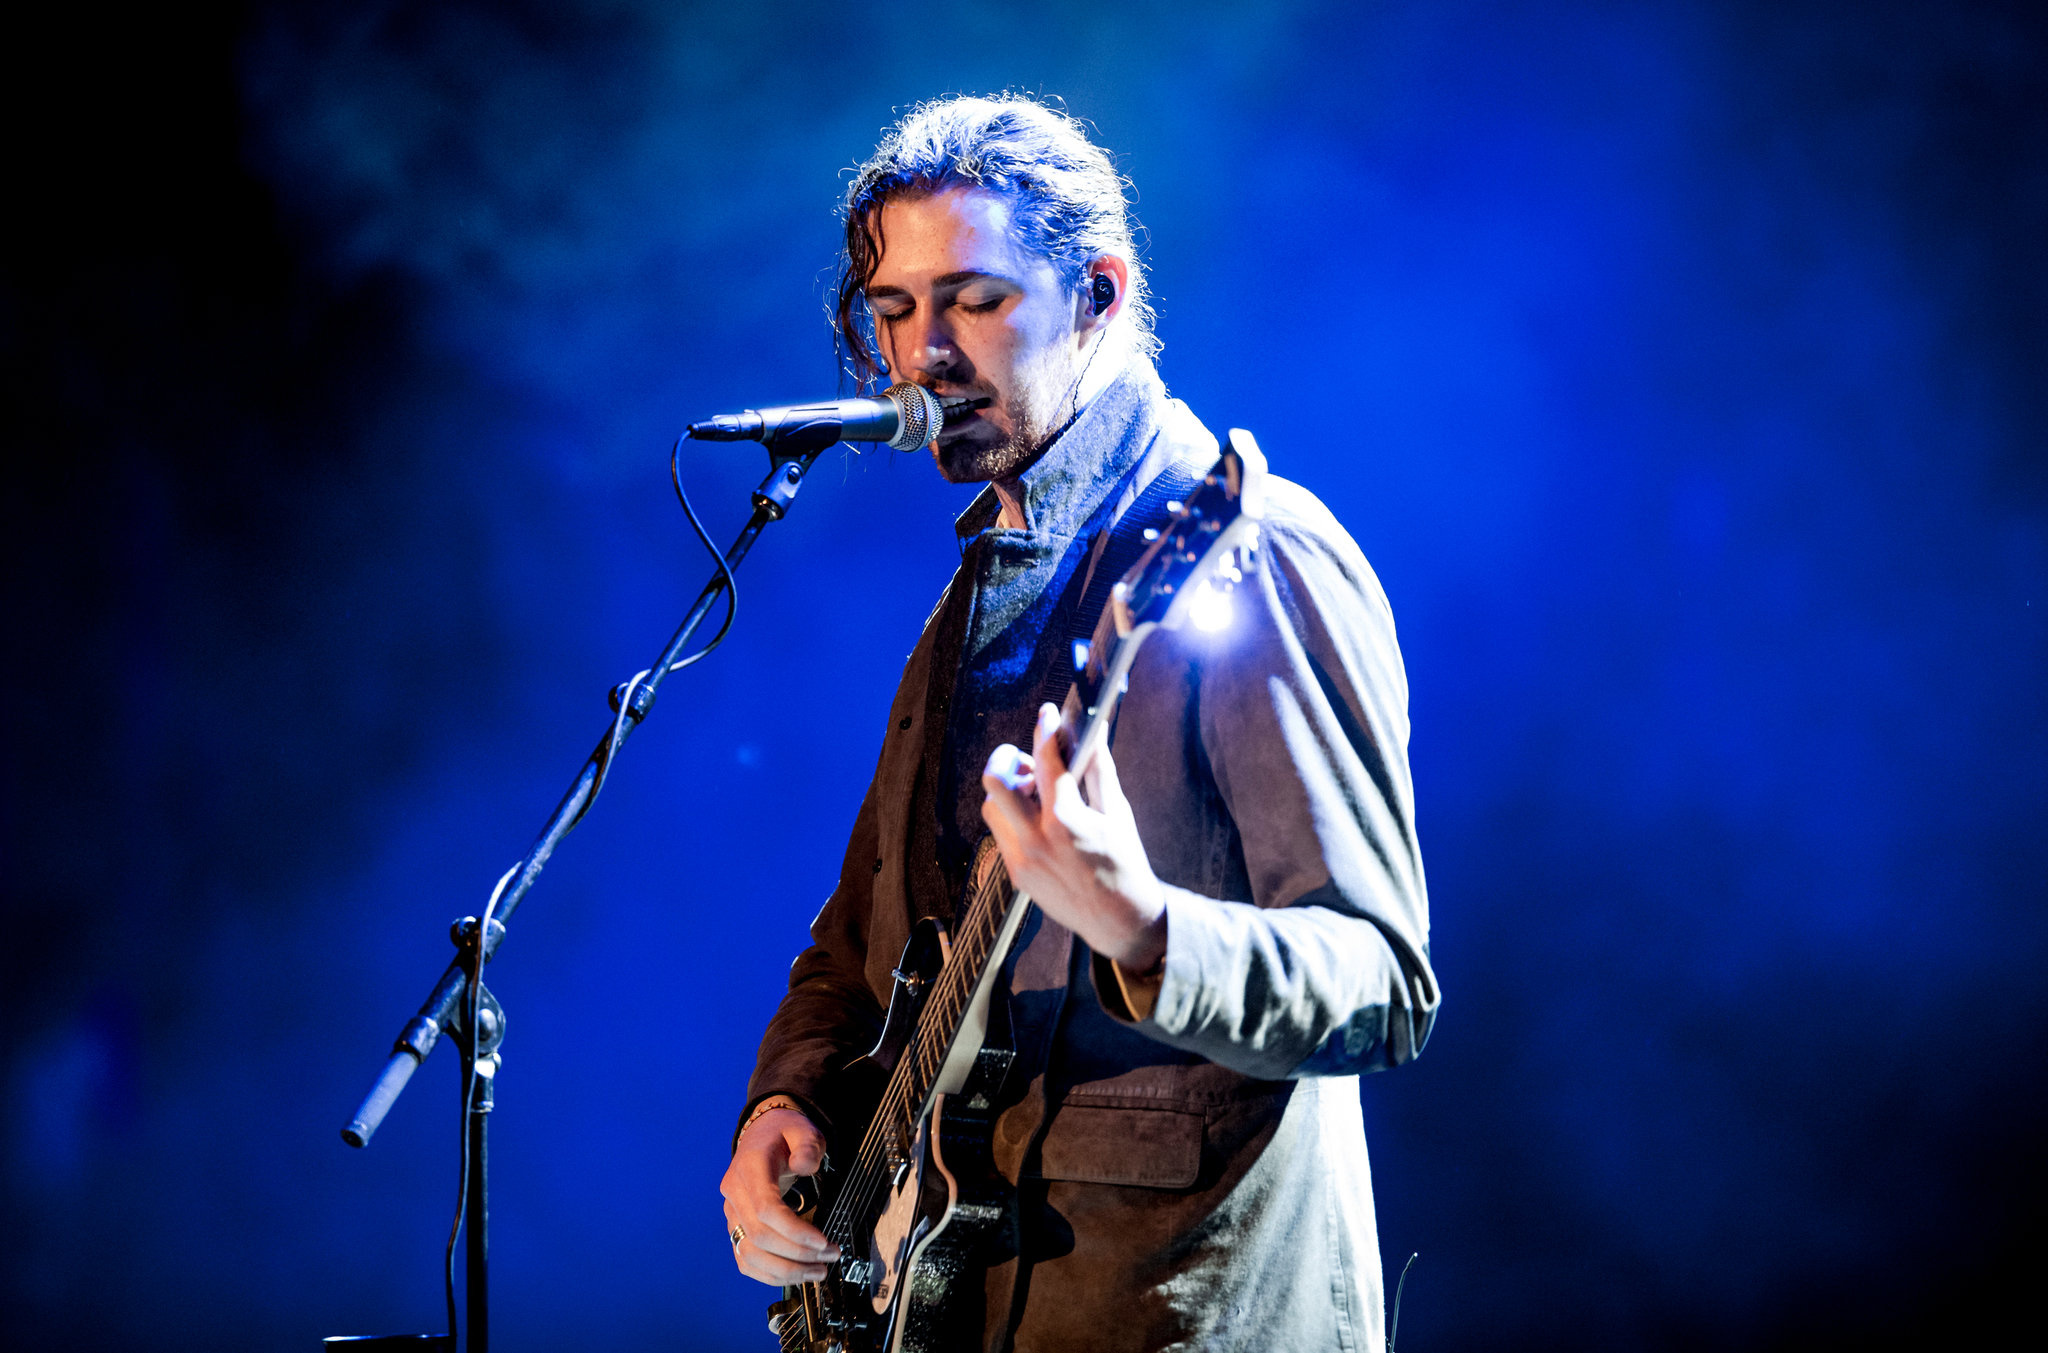 Hozier at Beacon Theater, Love songs, Futilities of life, Somber melodies, 2050x1360 HD Desktop